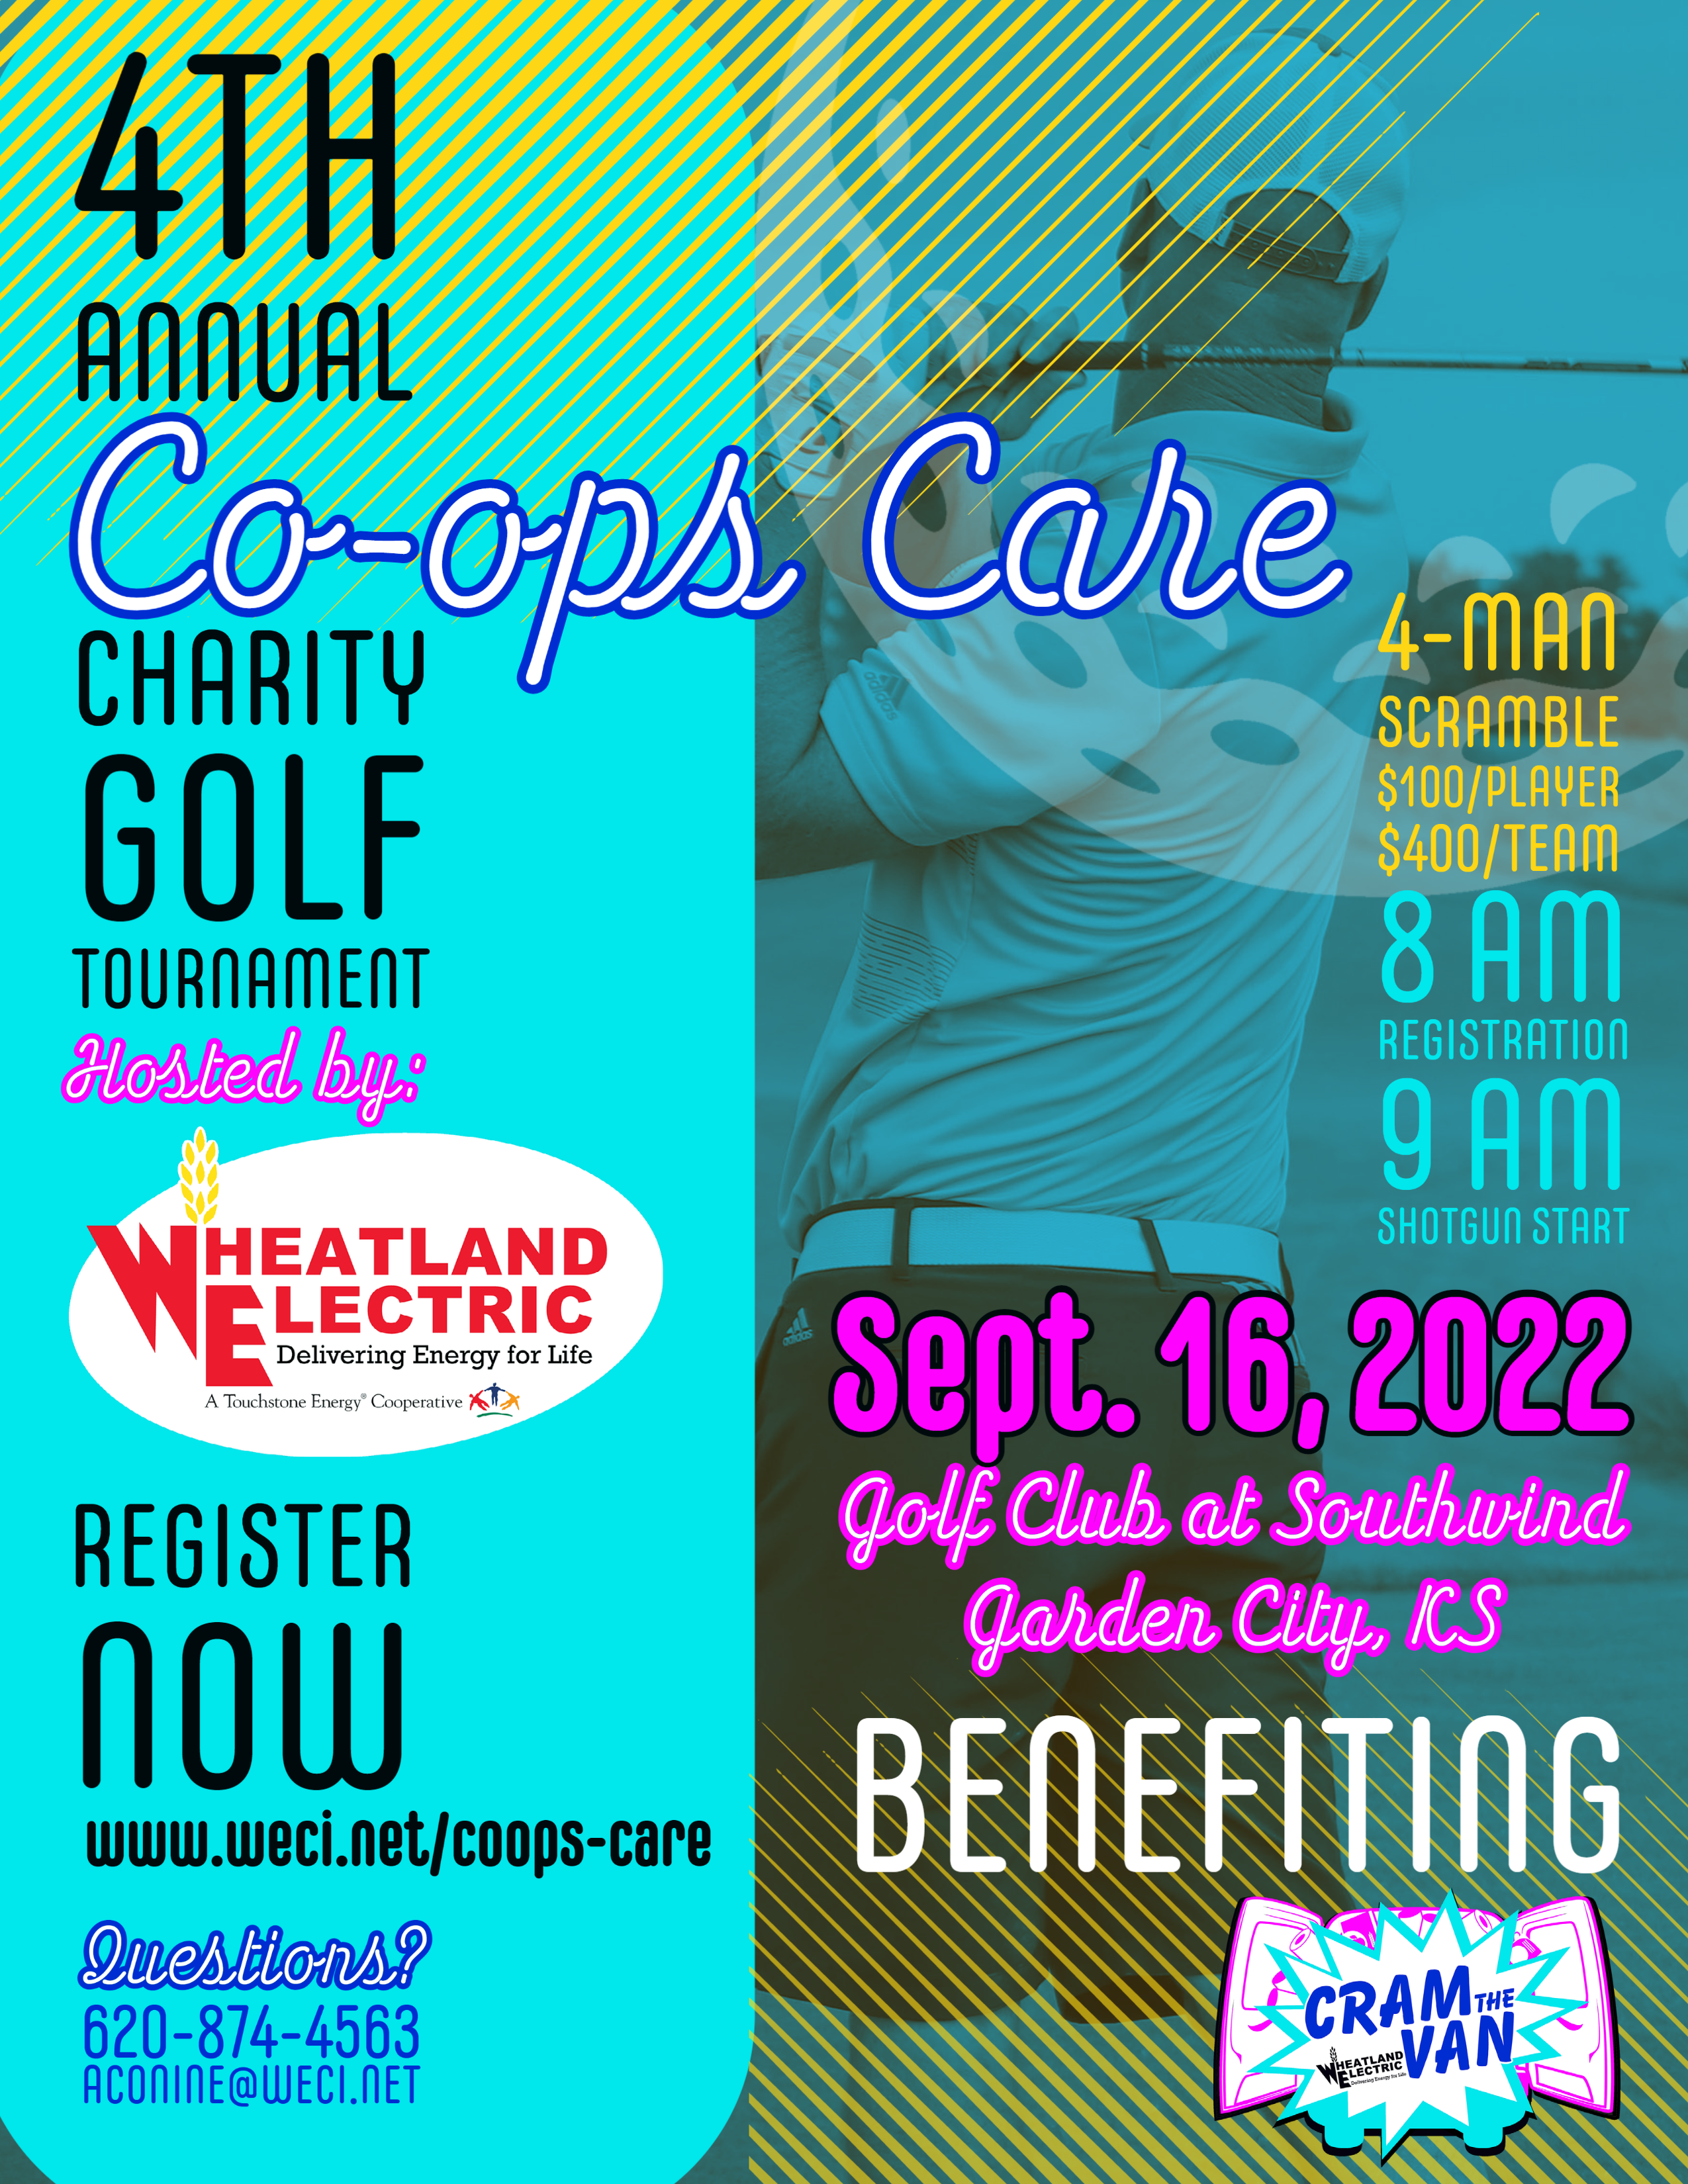 4th Annual Co-ops Care Golf Tournament 